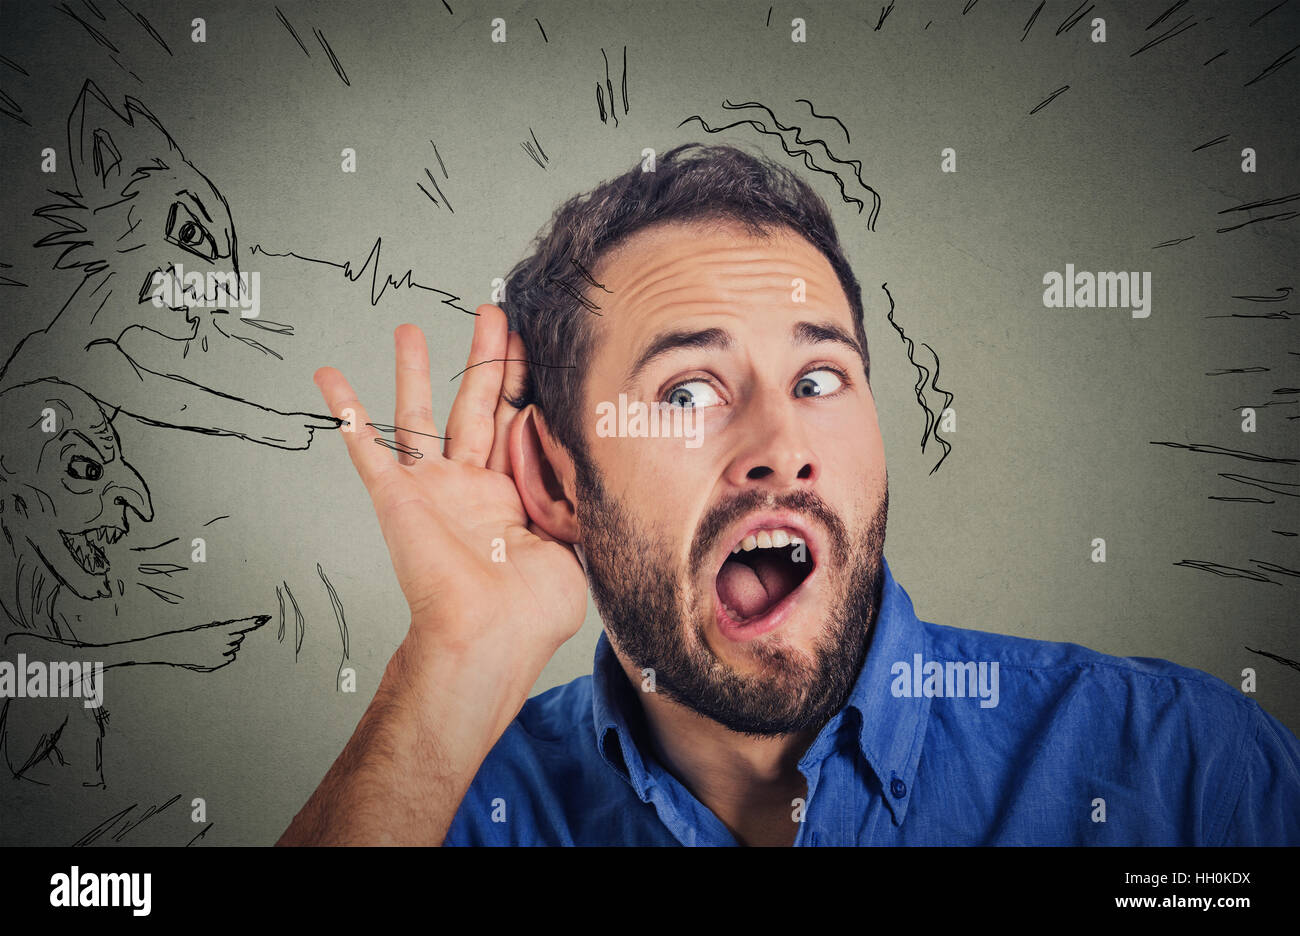 man with hand to ear gesture and evil voices screaming blaming him isolated on gray background. Human emotion face expression Stock Photo